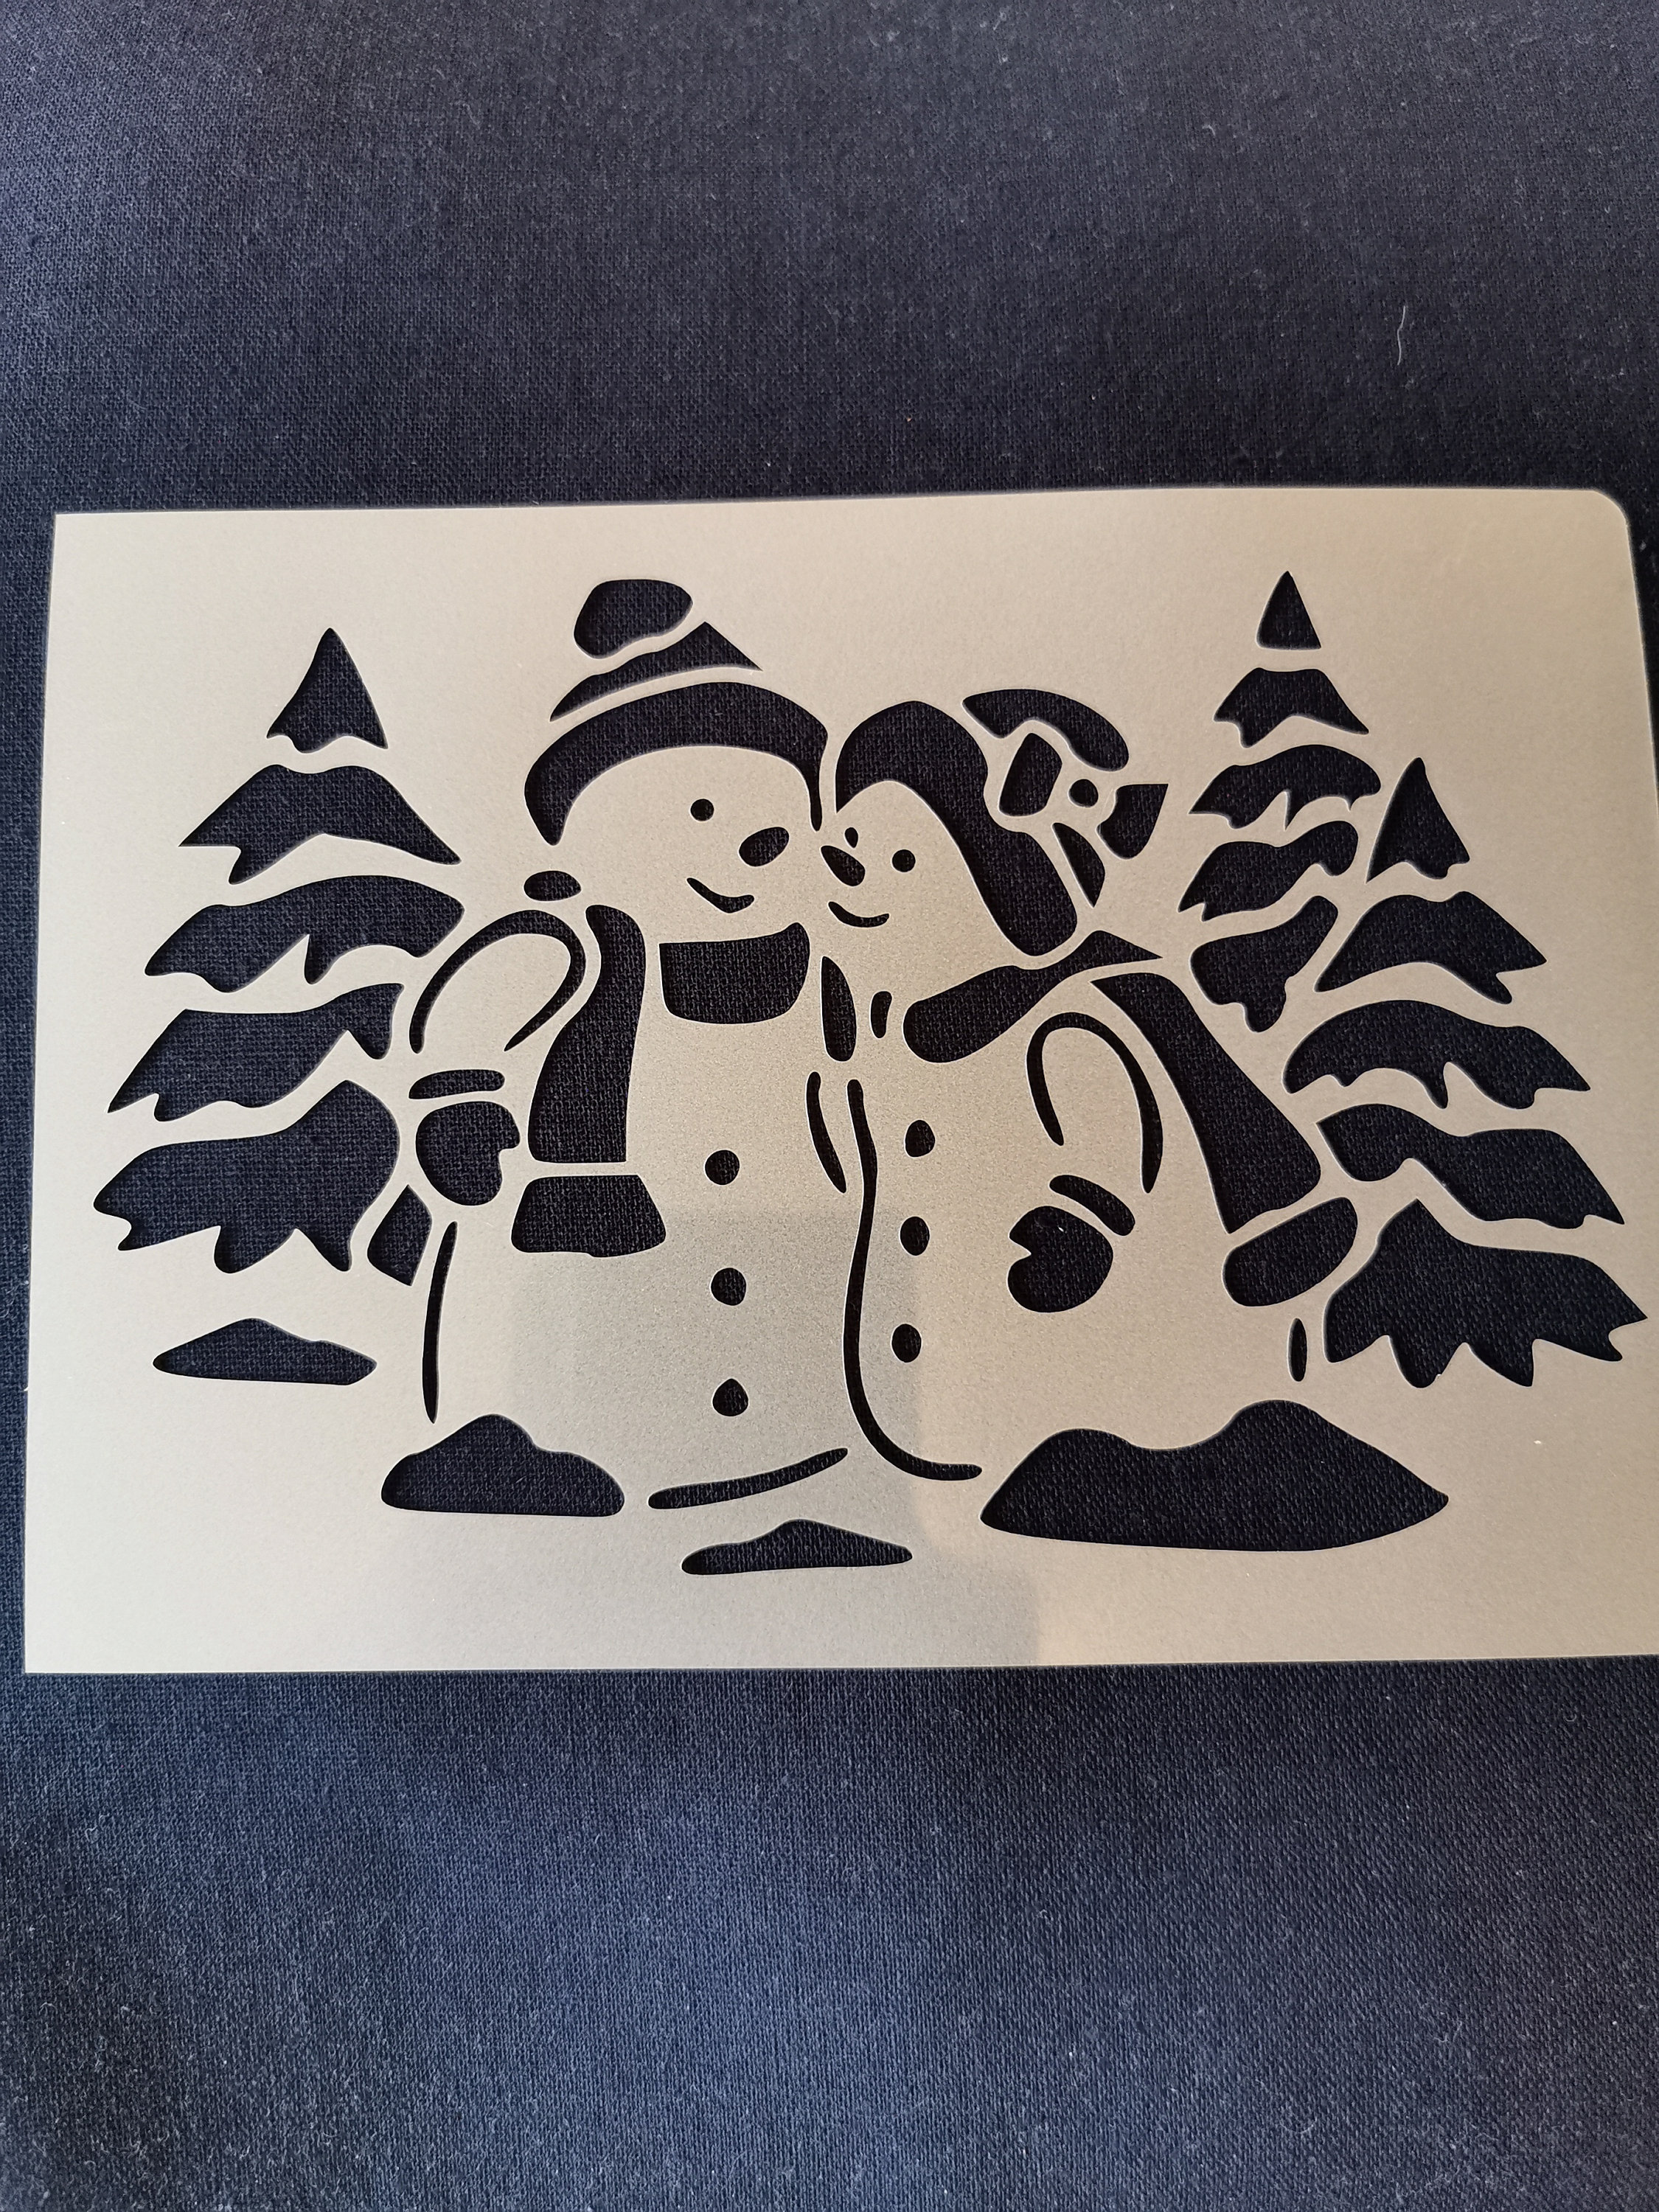 Christmas Stencils for All Artists Crafters Makers